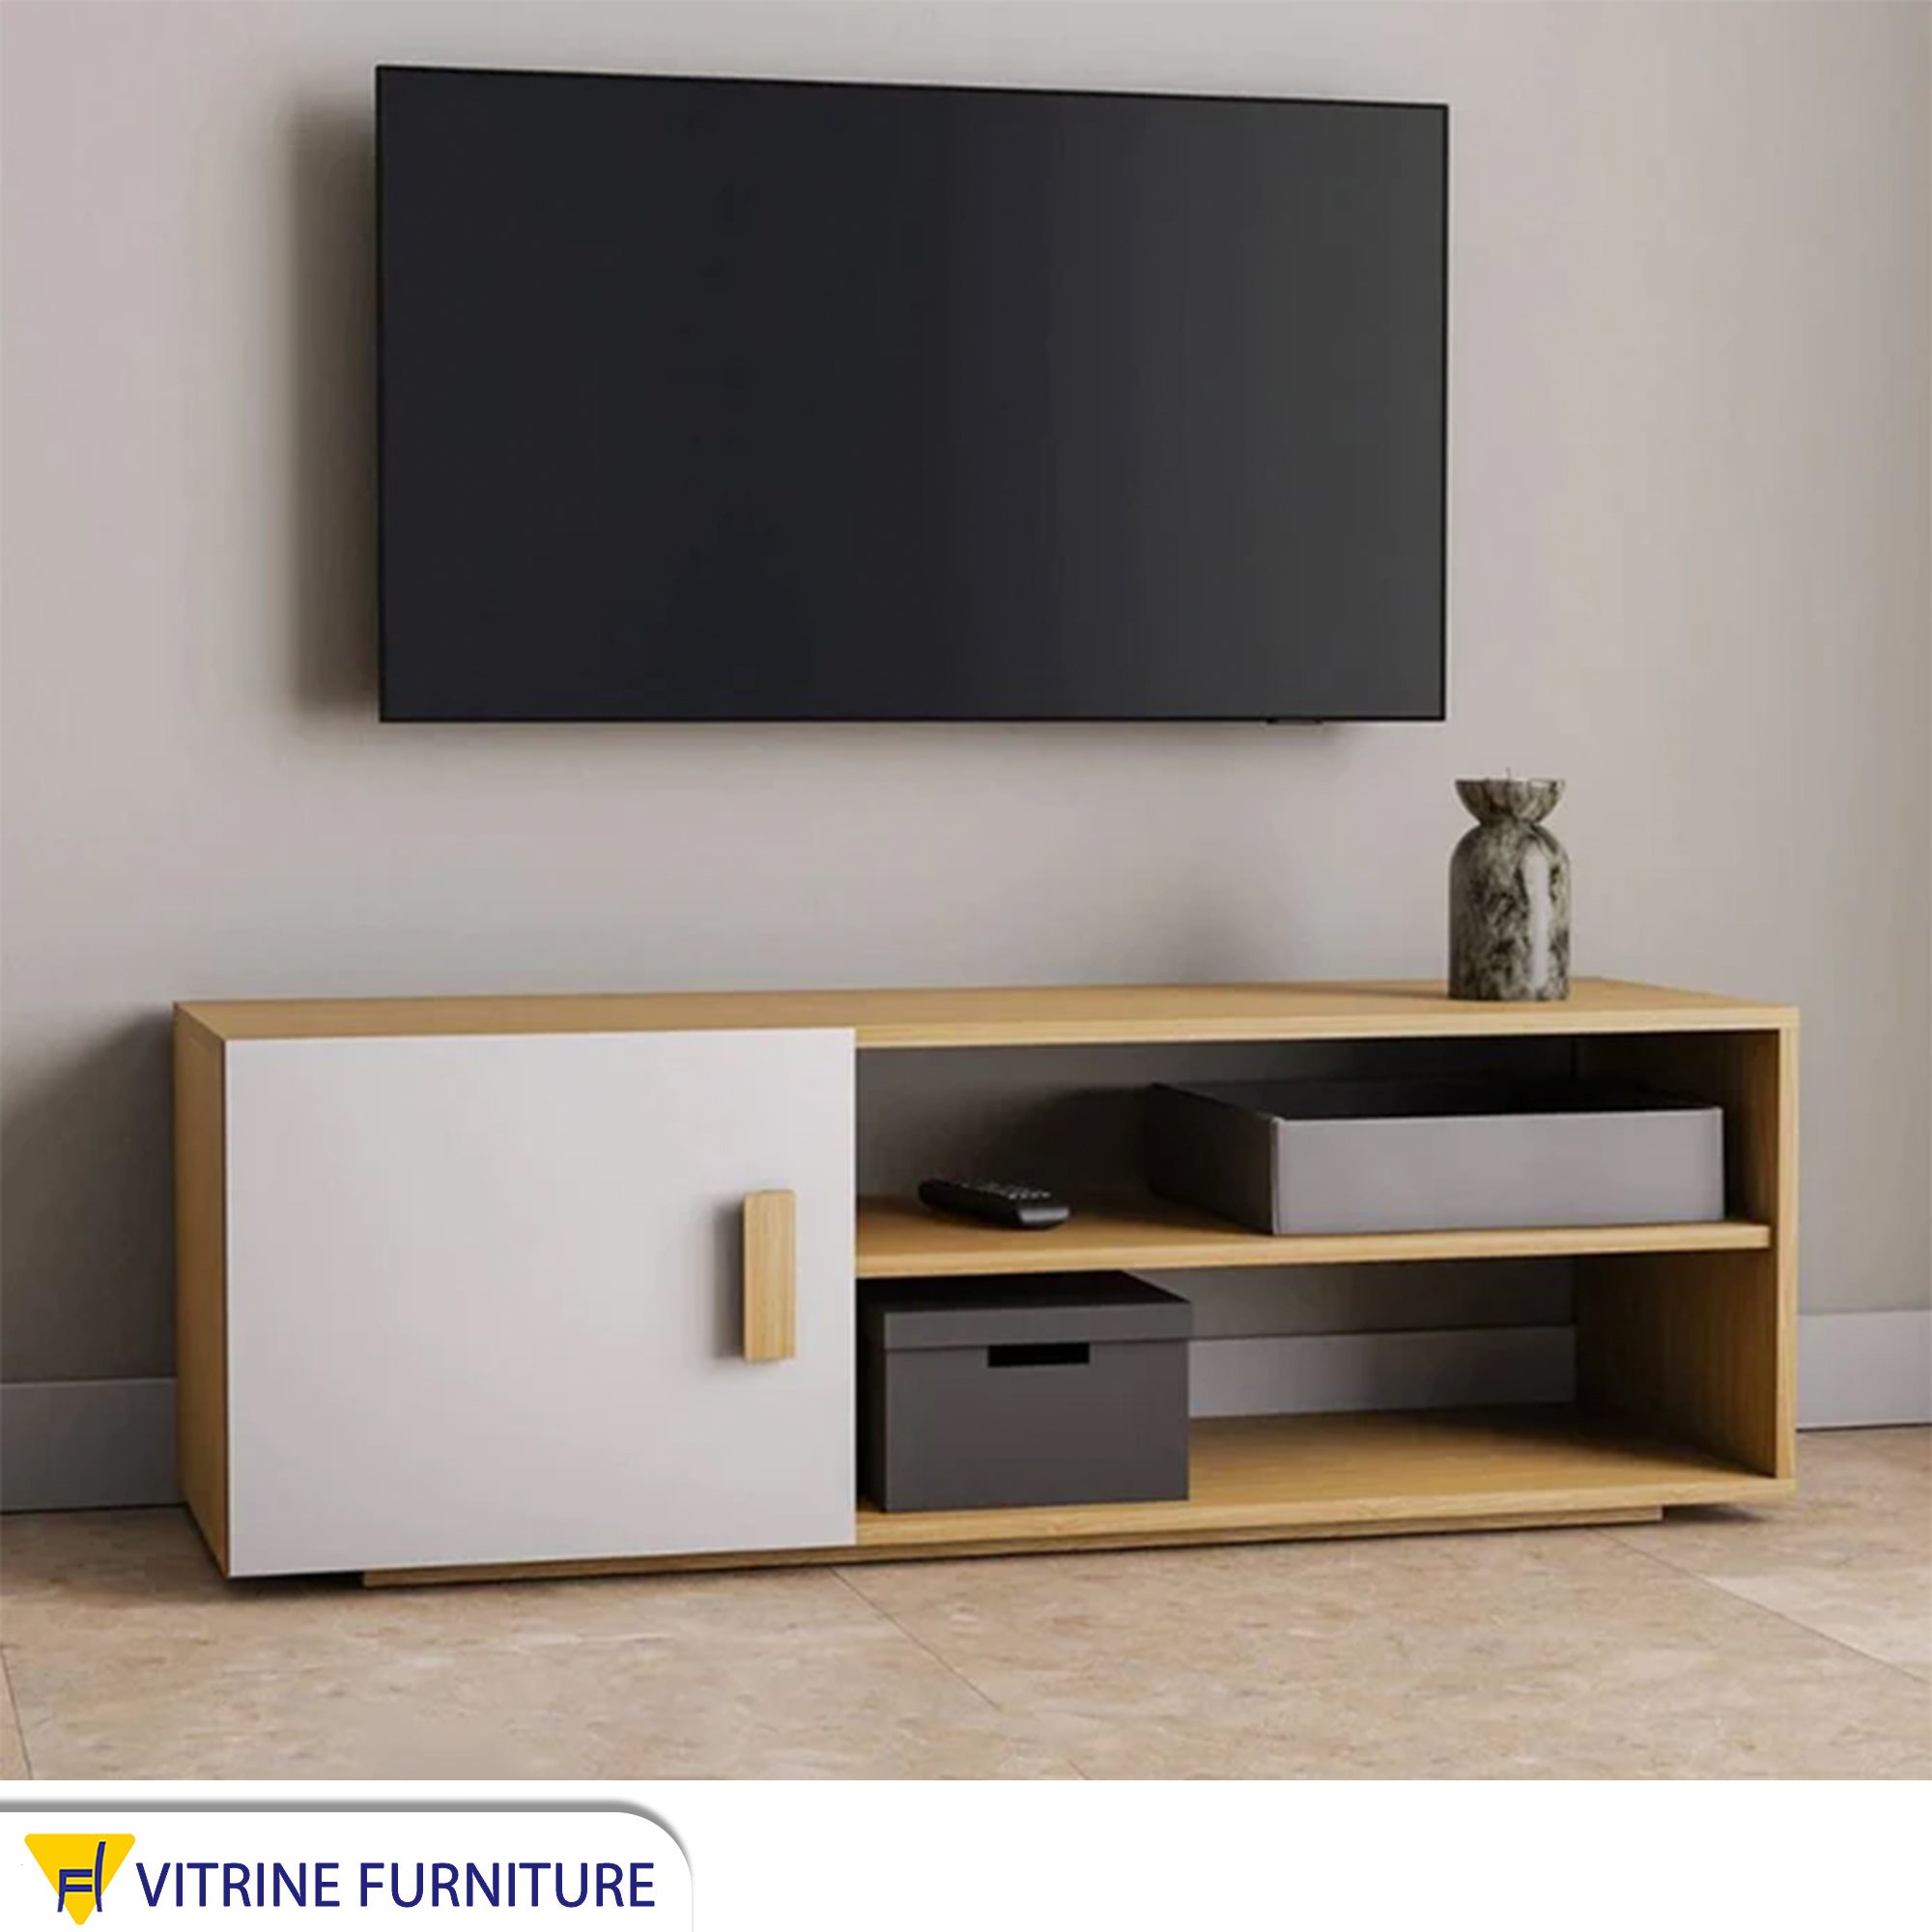 TV unit with two shelves and a movable shutter